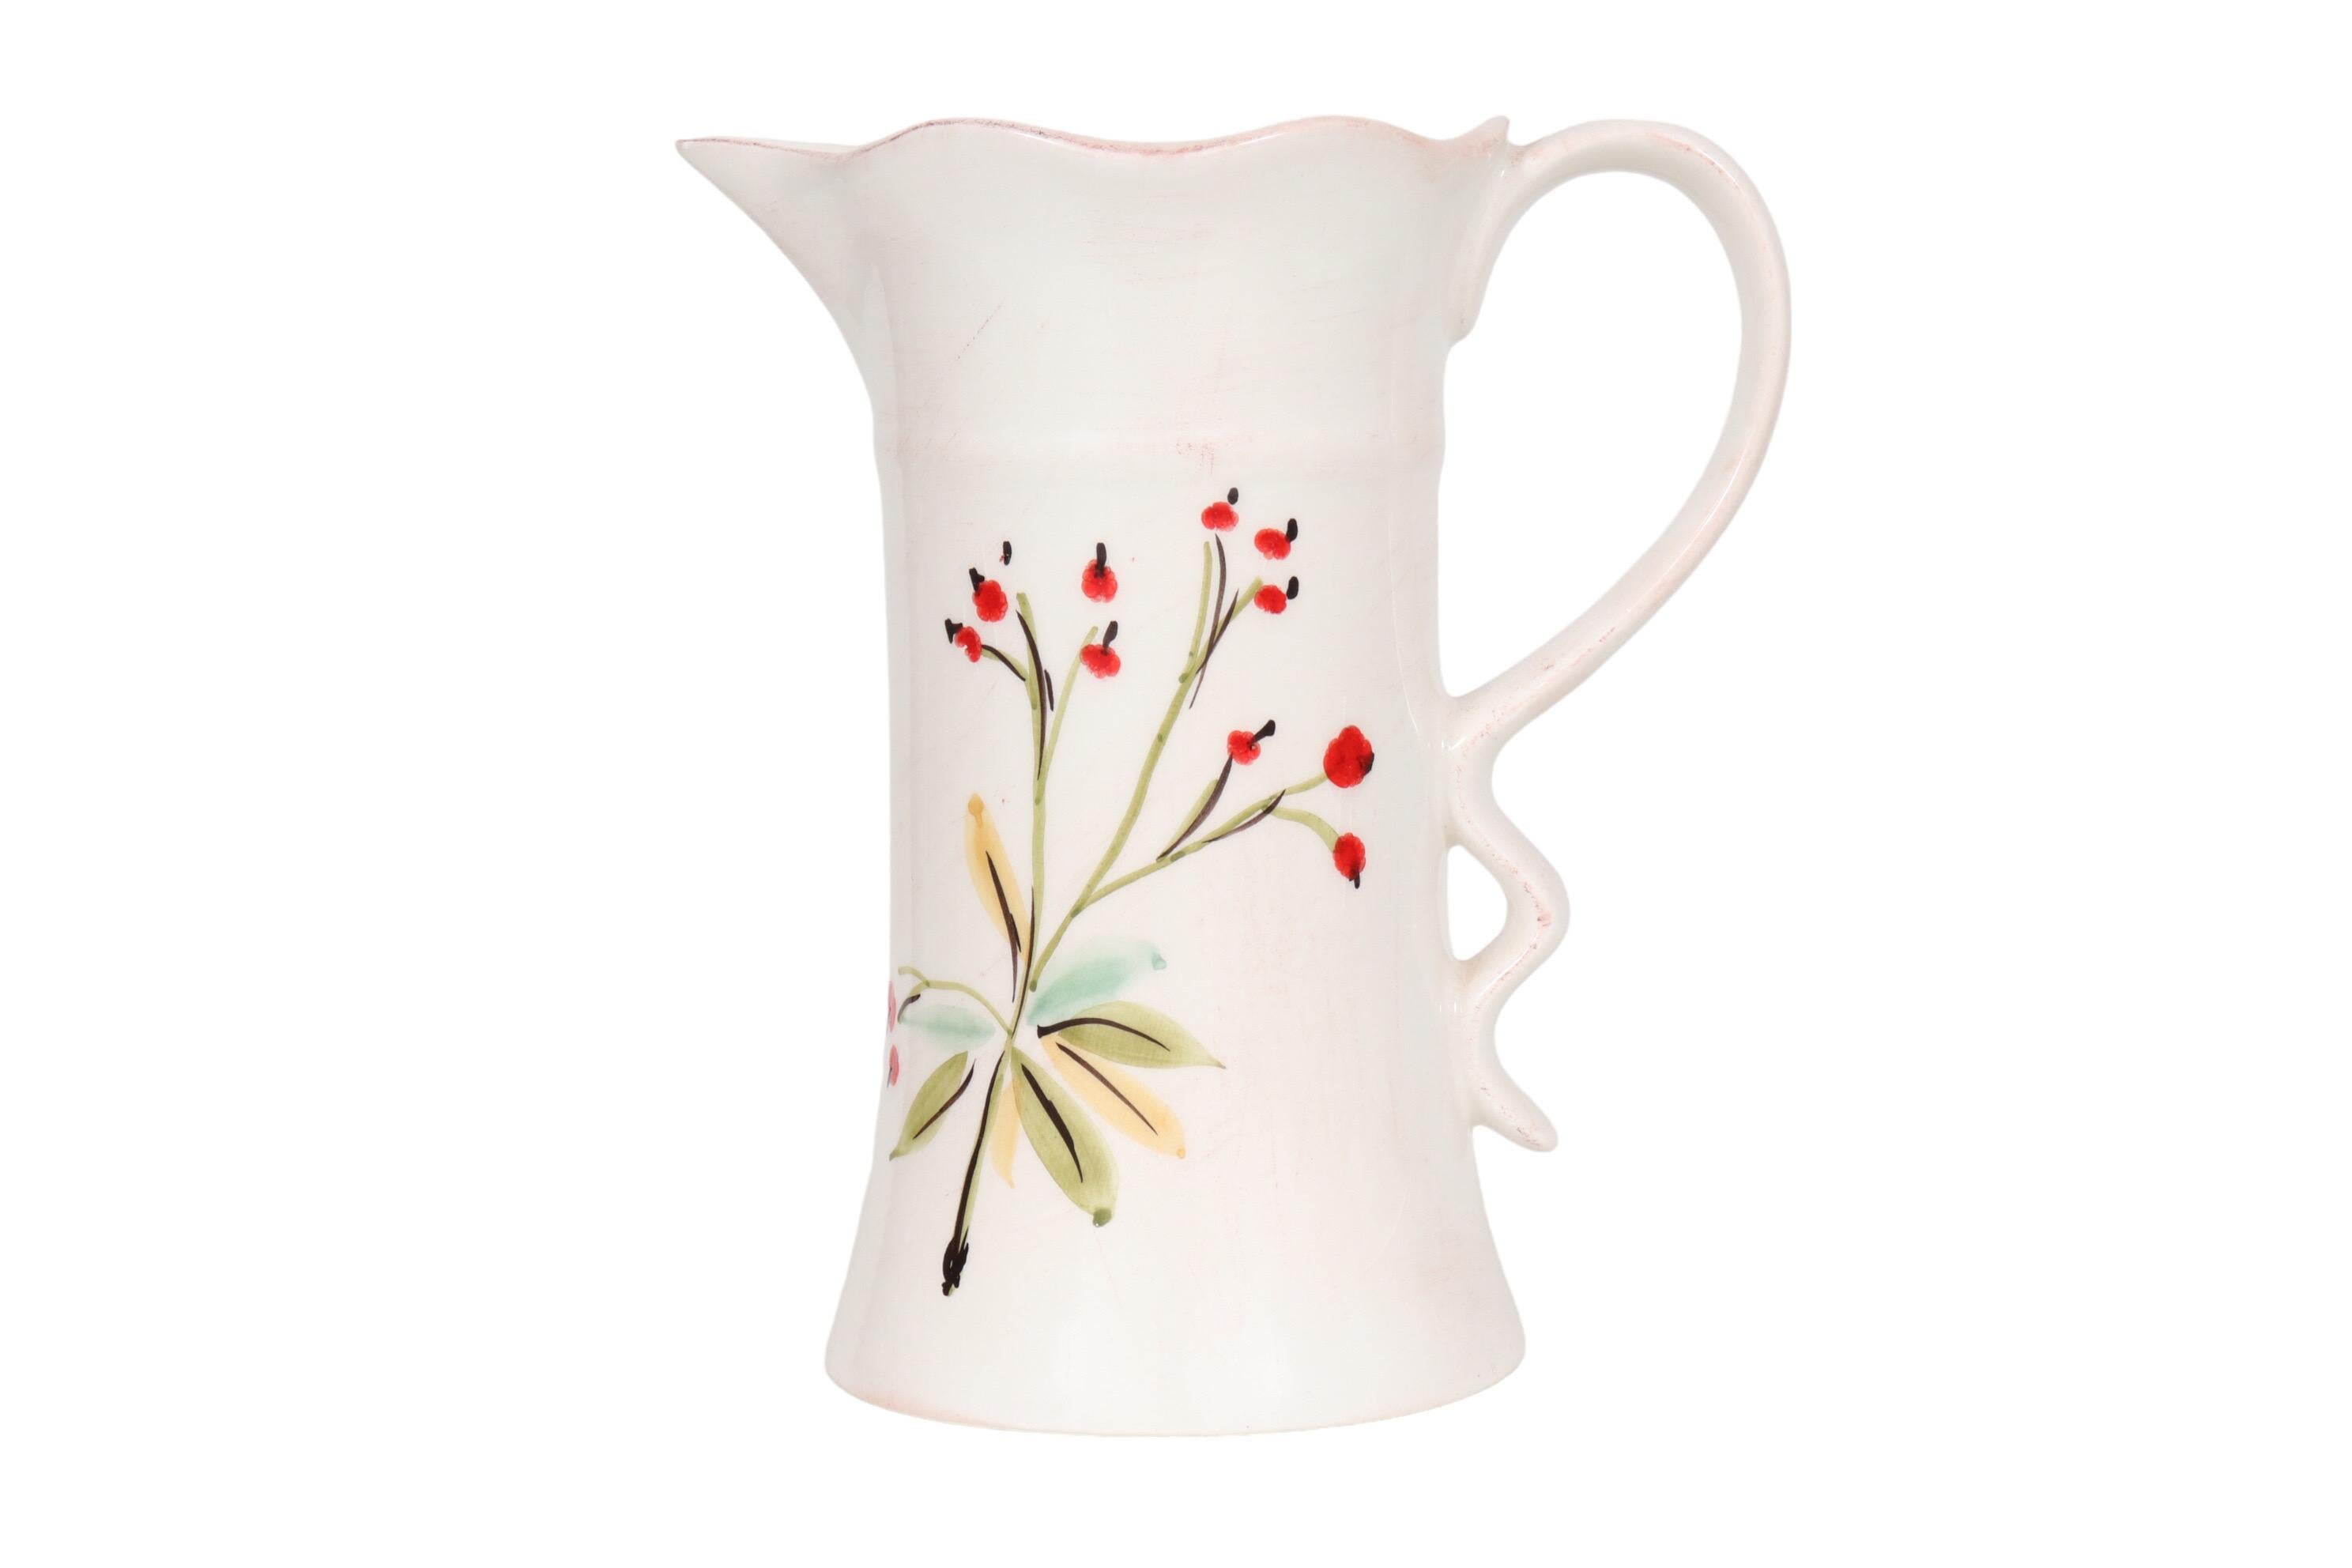 An Italian ceramic pitcher made by Tiriduzzi. Hand painted with a simple floral spray of red poppies on a white background. The lip is lightly ruffled, this wave mirrored in the base of the loop handle. Marked underneath “Ceramiche Umbre by